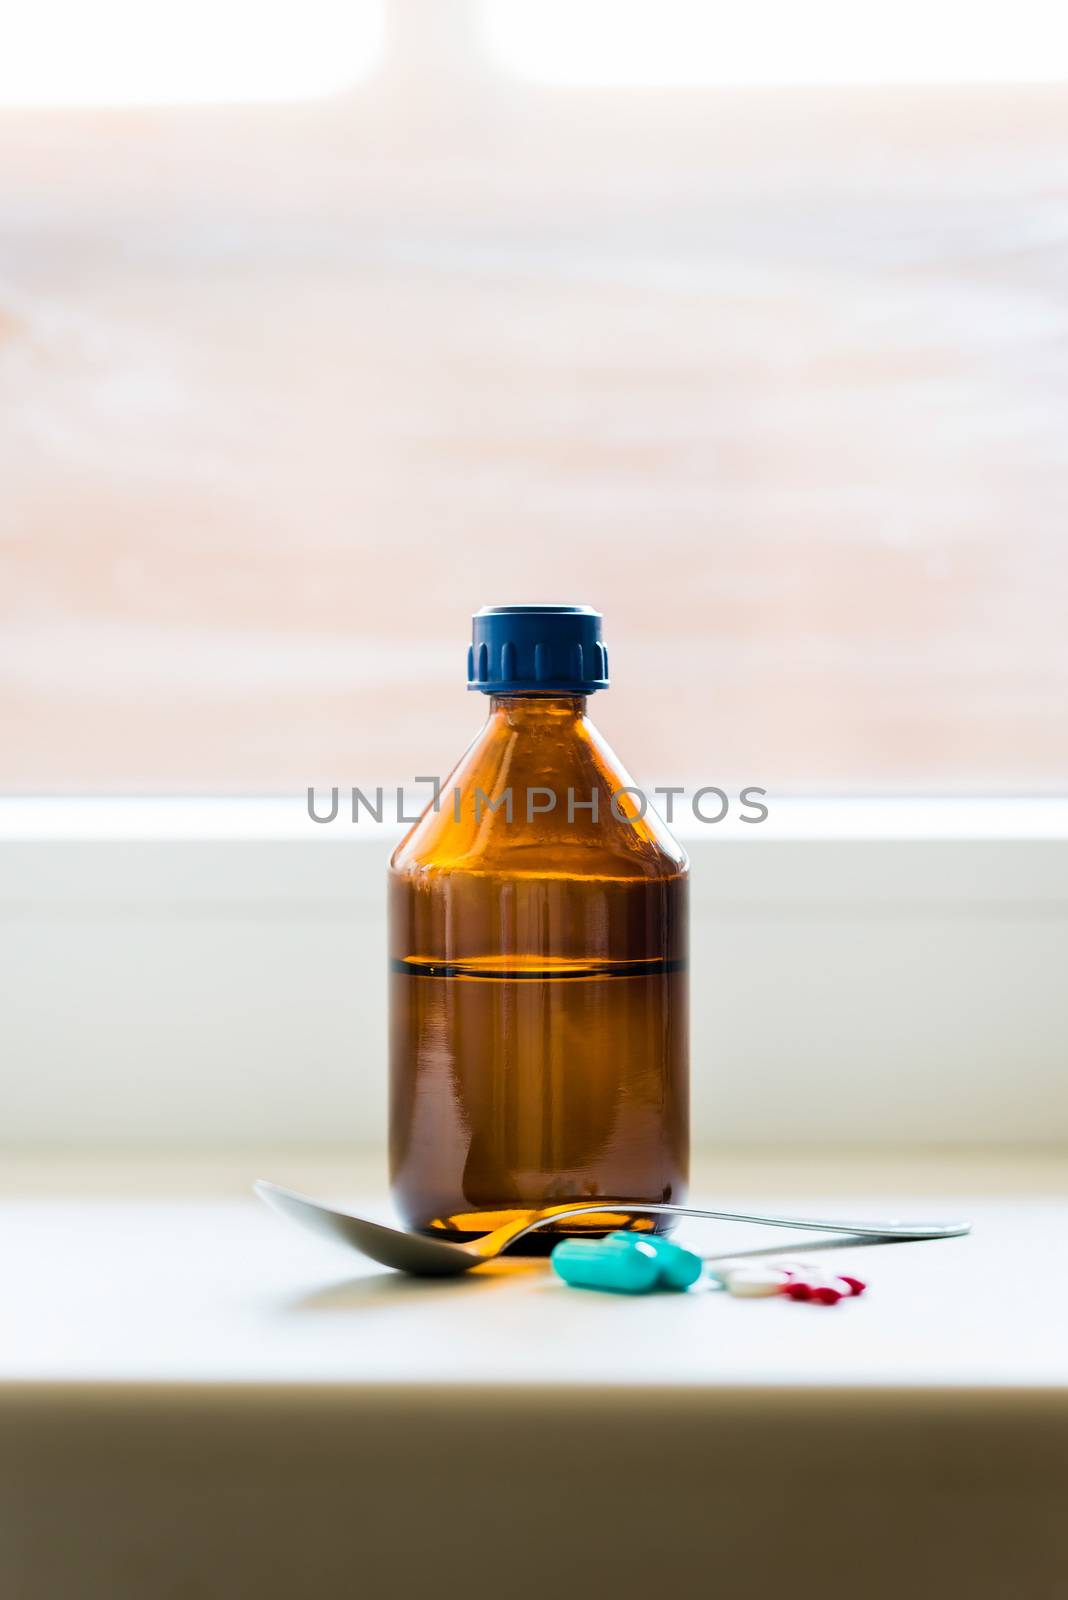 A cough syrup bottle with a spoon and some pills close to the window